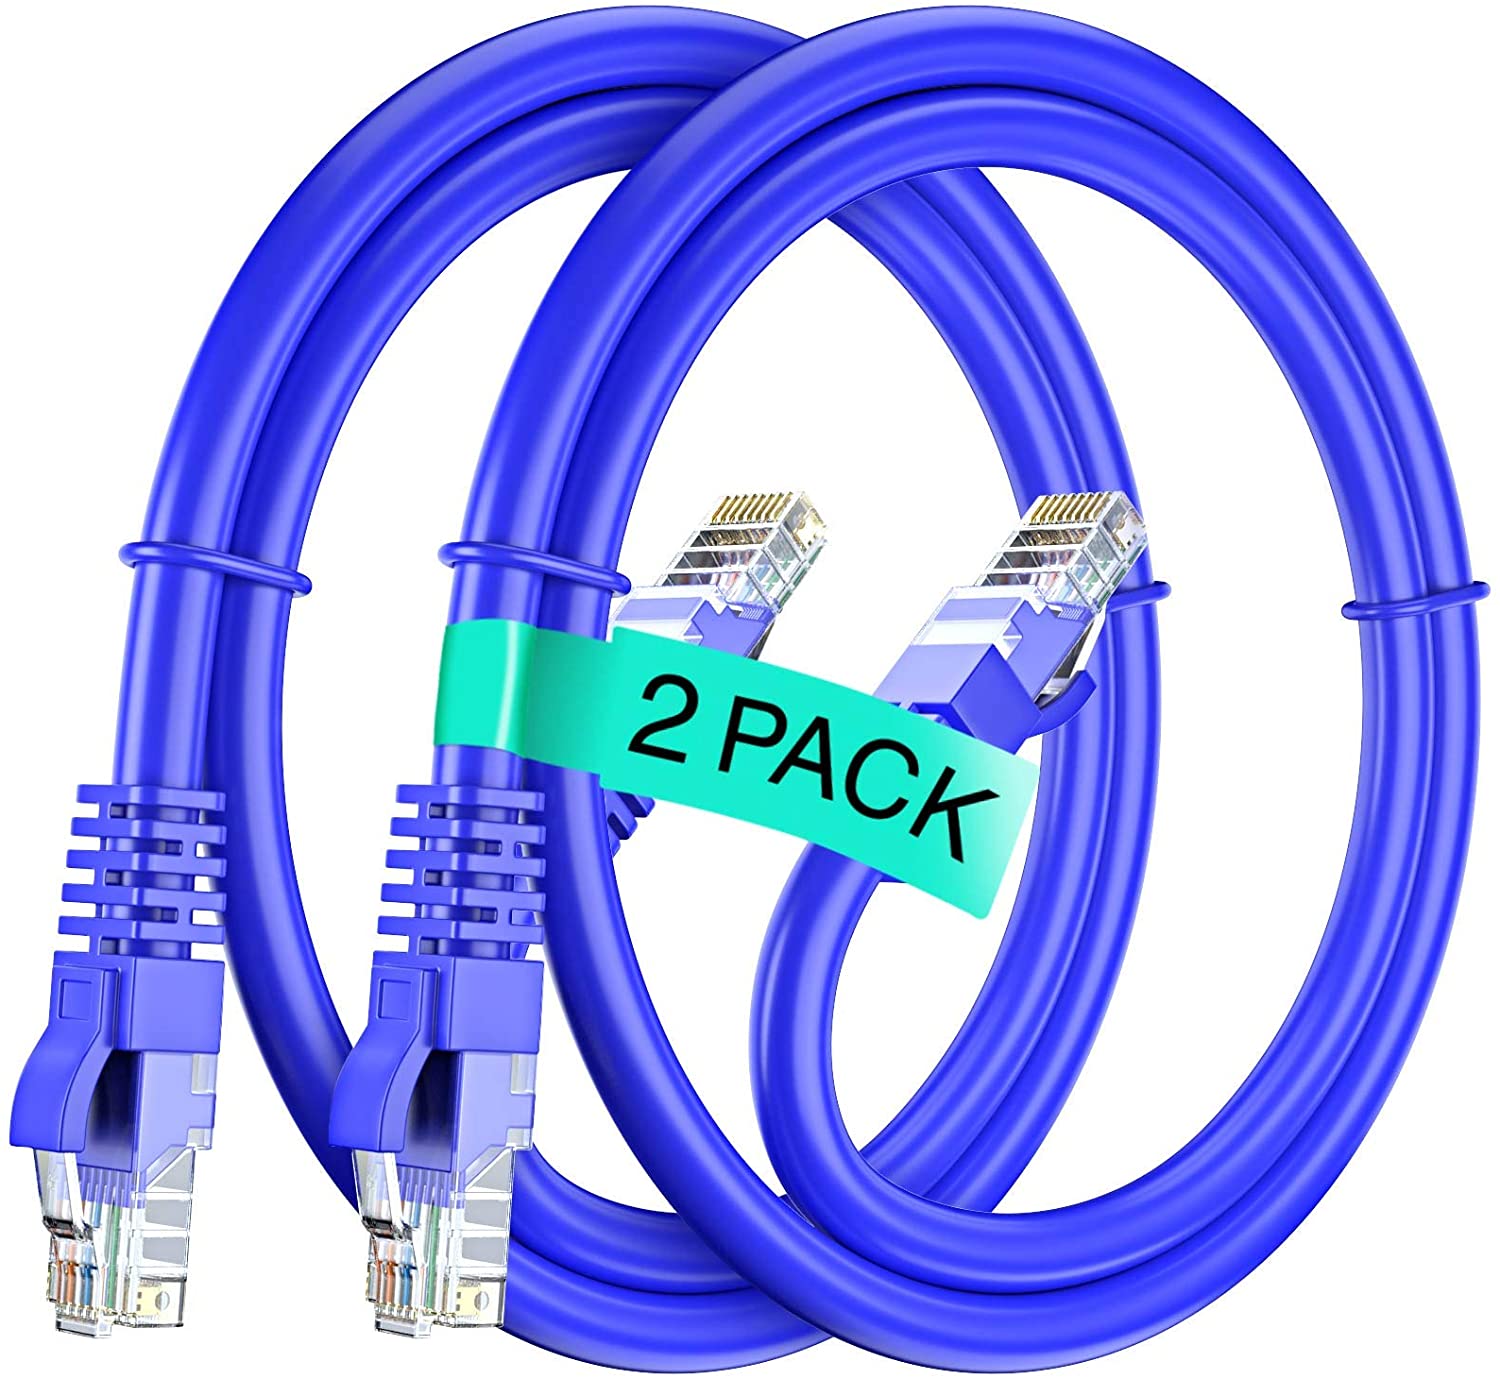 2 EPC3BL 3' Cat6 Ethernet network patch cable RJ45 23AWG 600M solid copper wire 3' blue